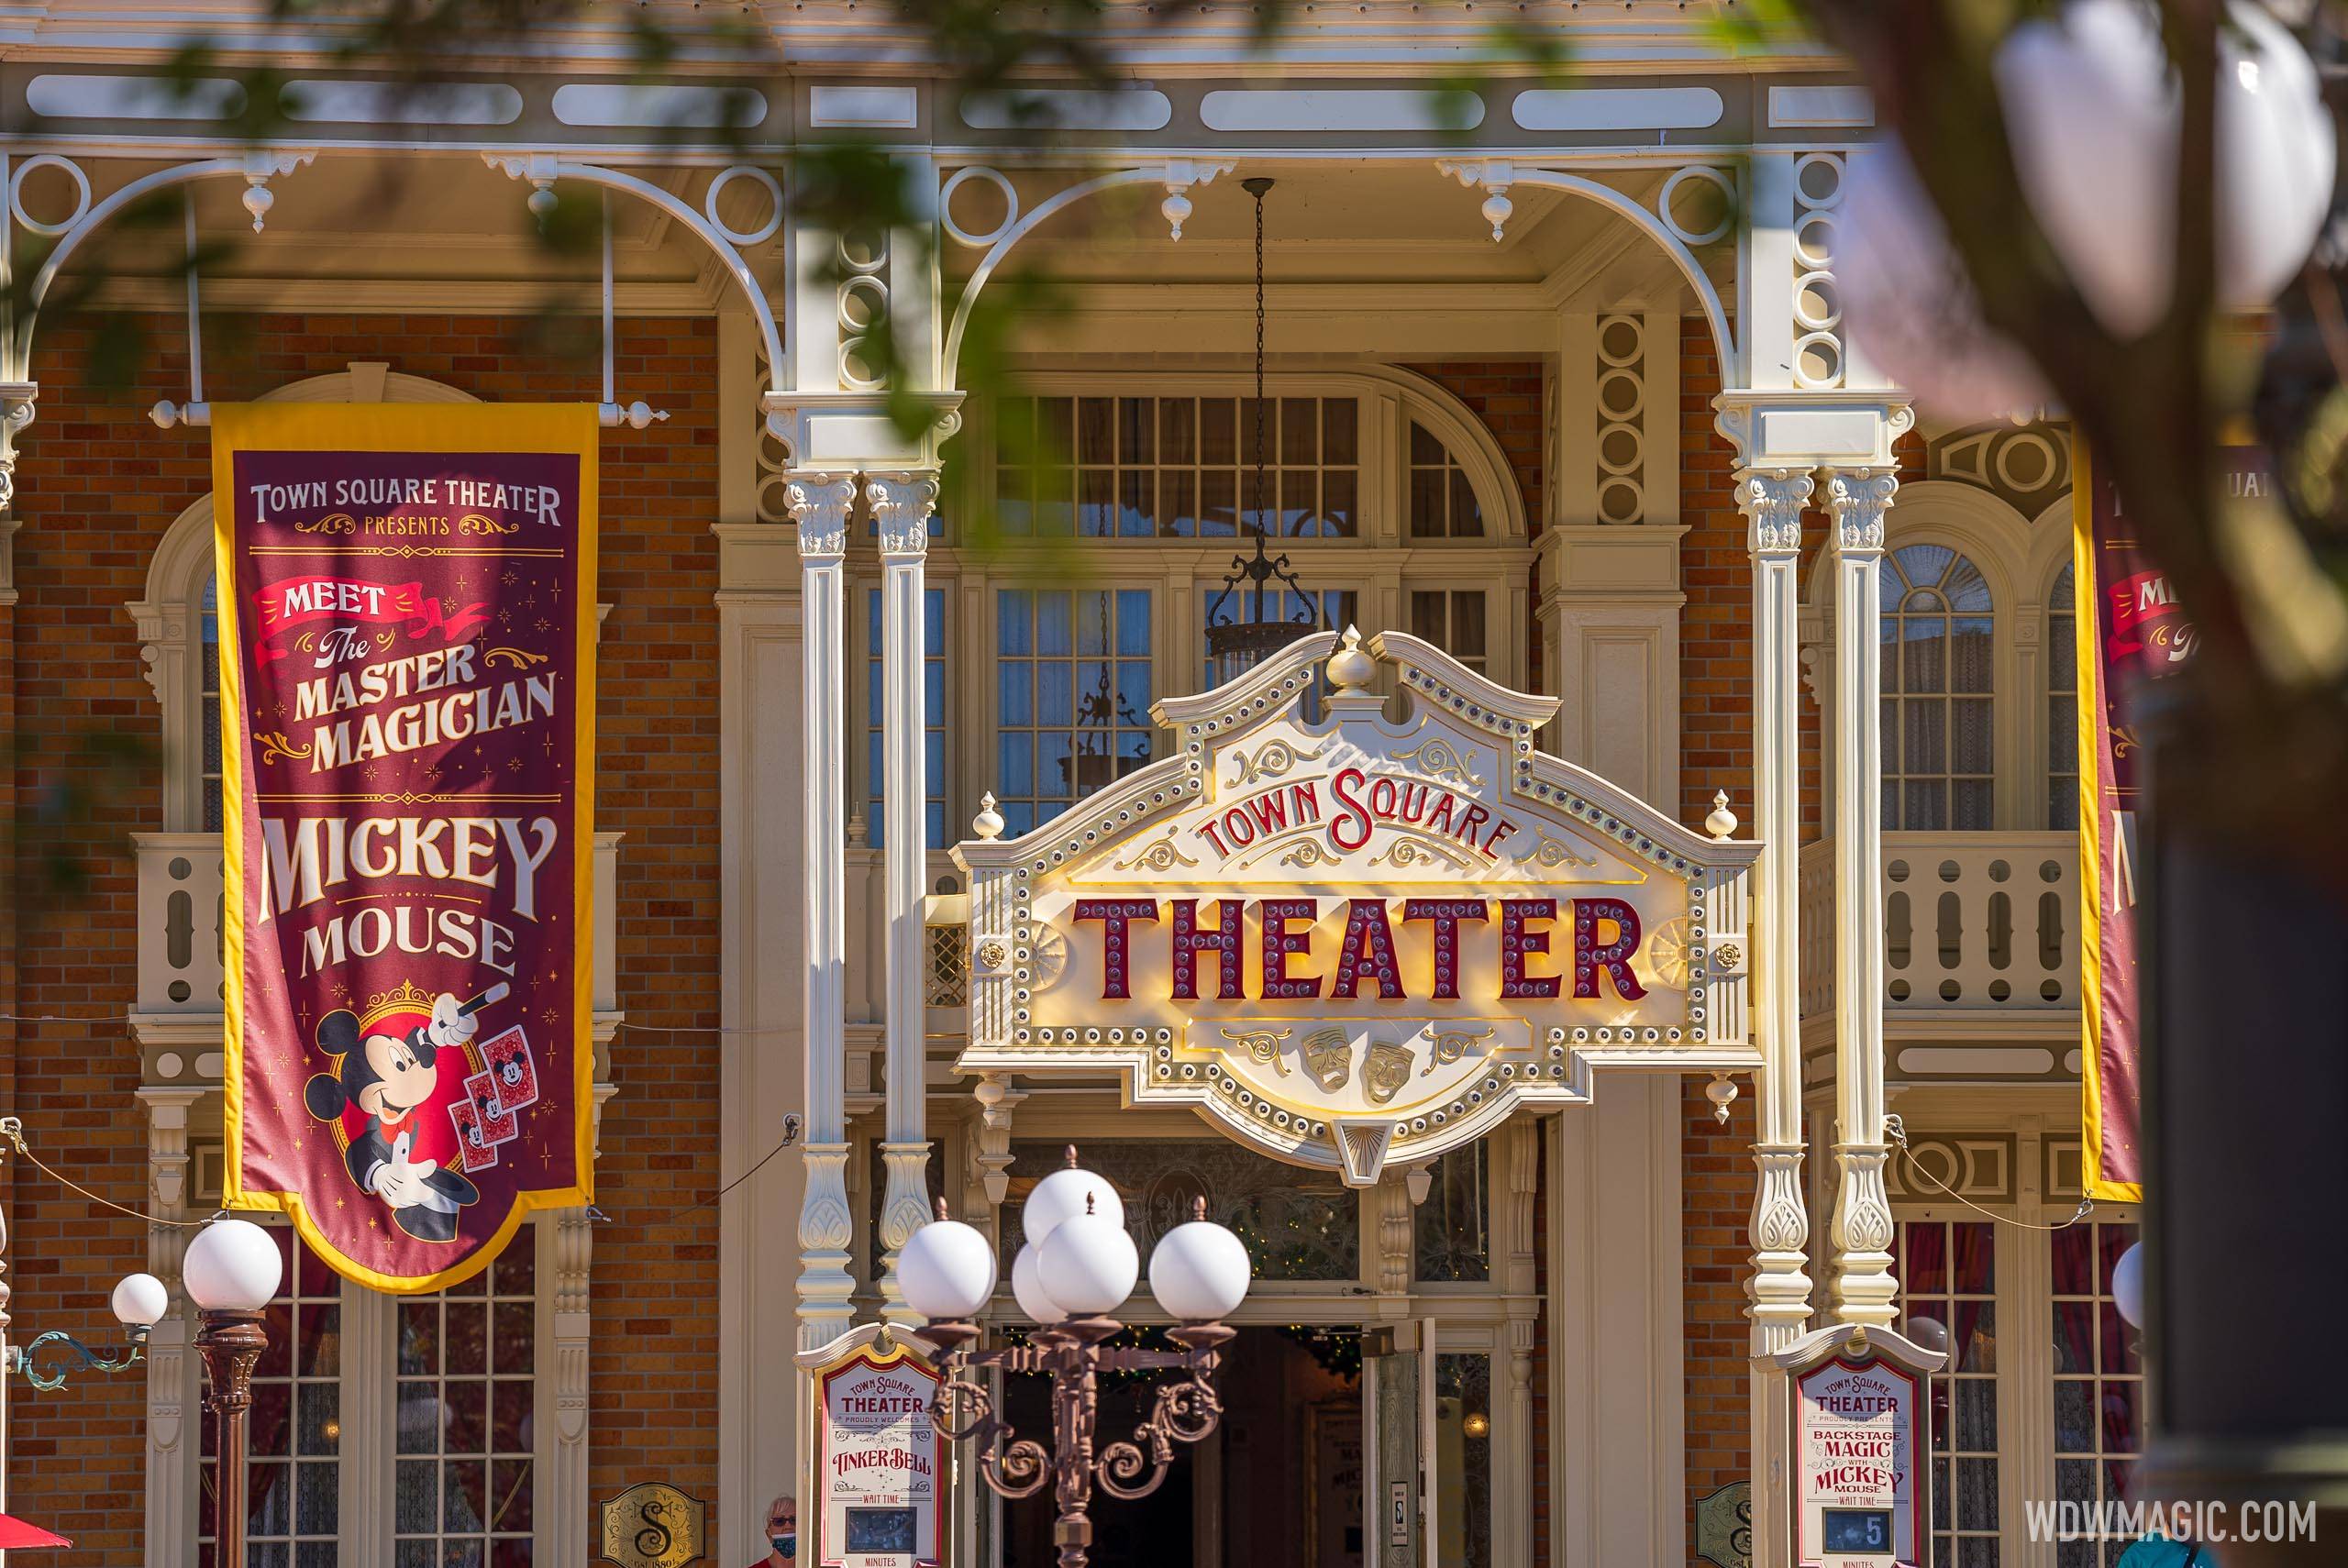 Minnie will be joining Mickey at Town Square Theater.